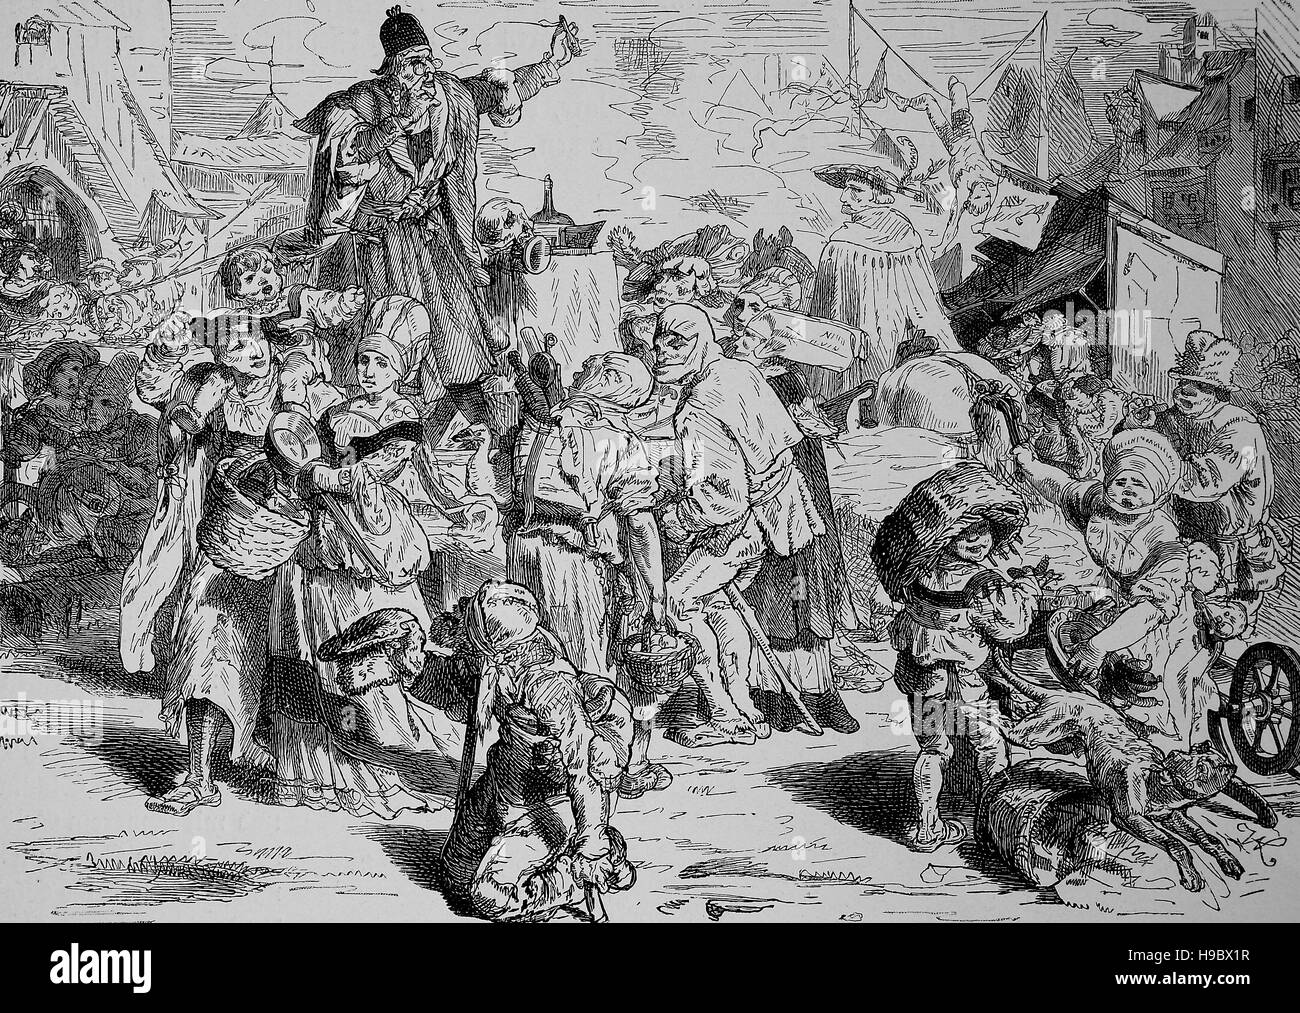 yearly Fair, typical market scene in the Middle Ages in Germany, historical illustration Stock Photo